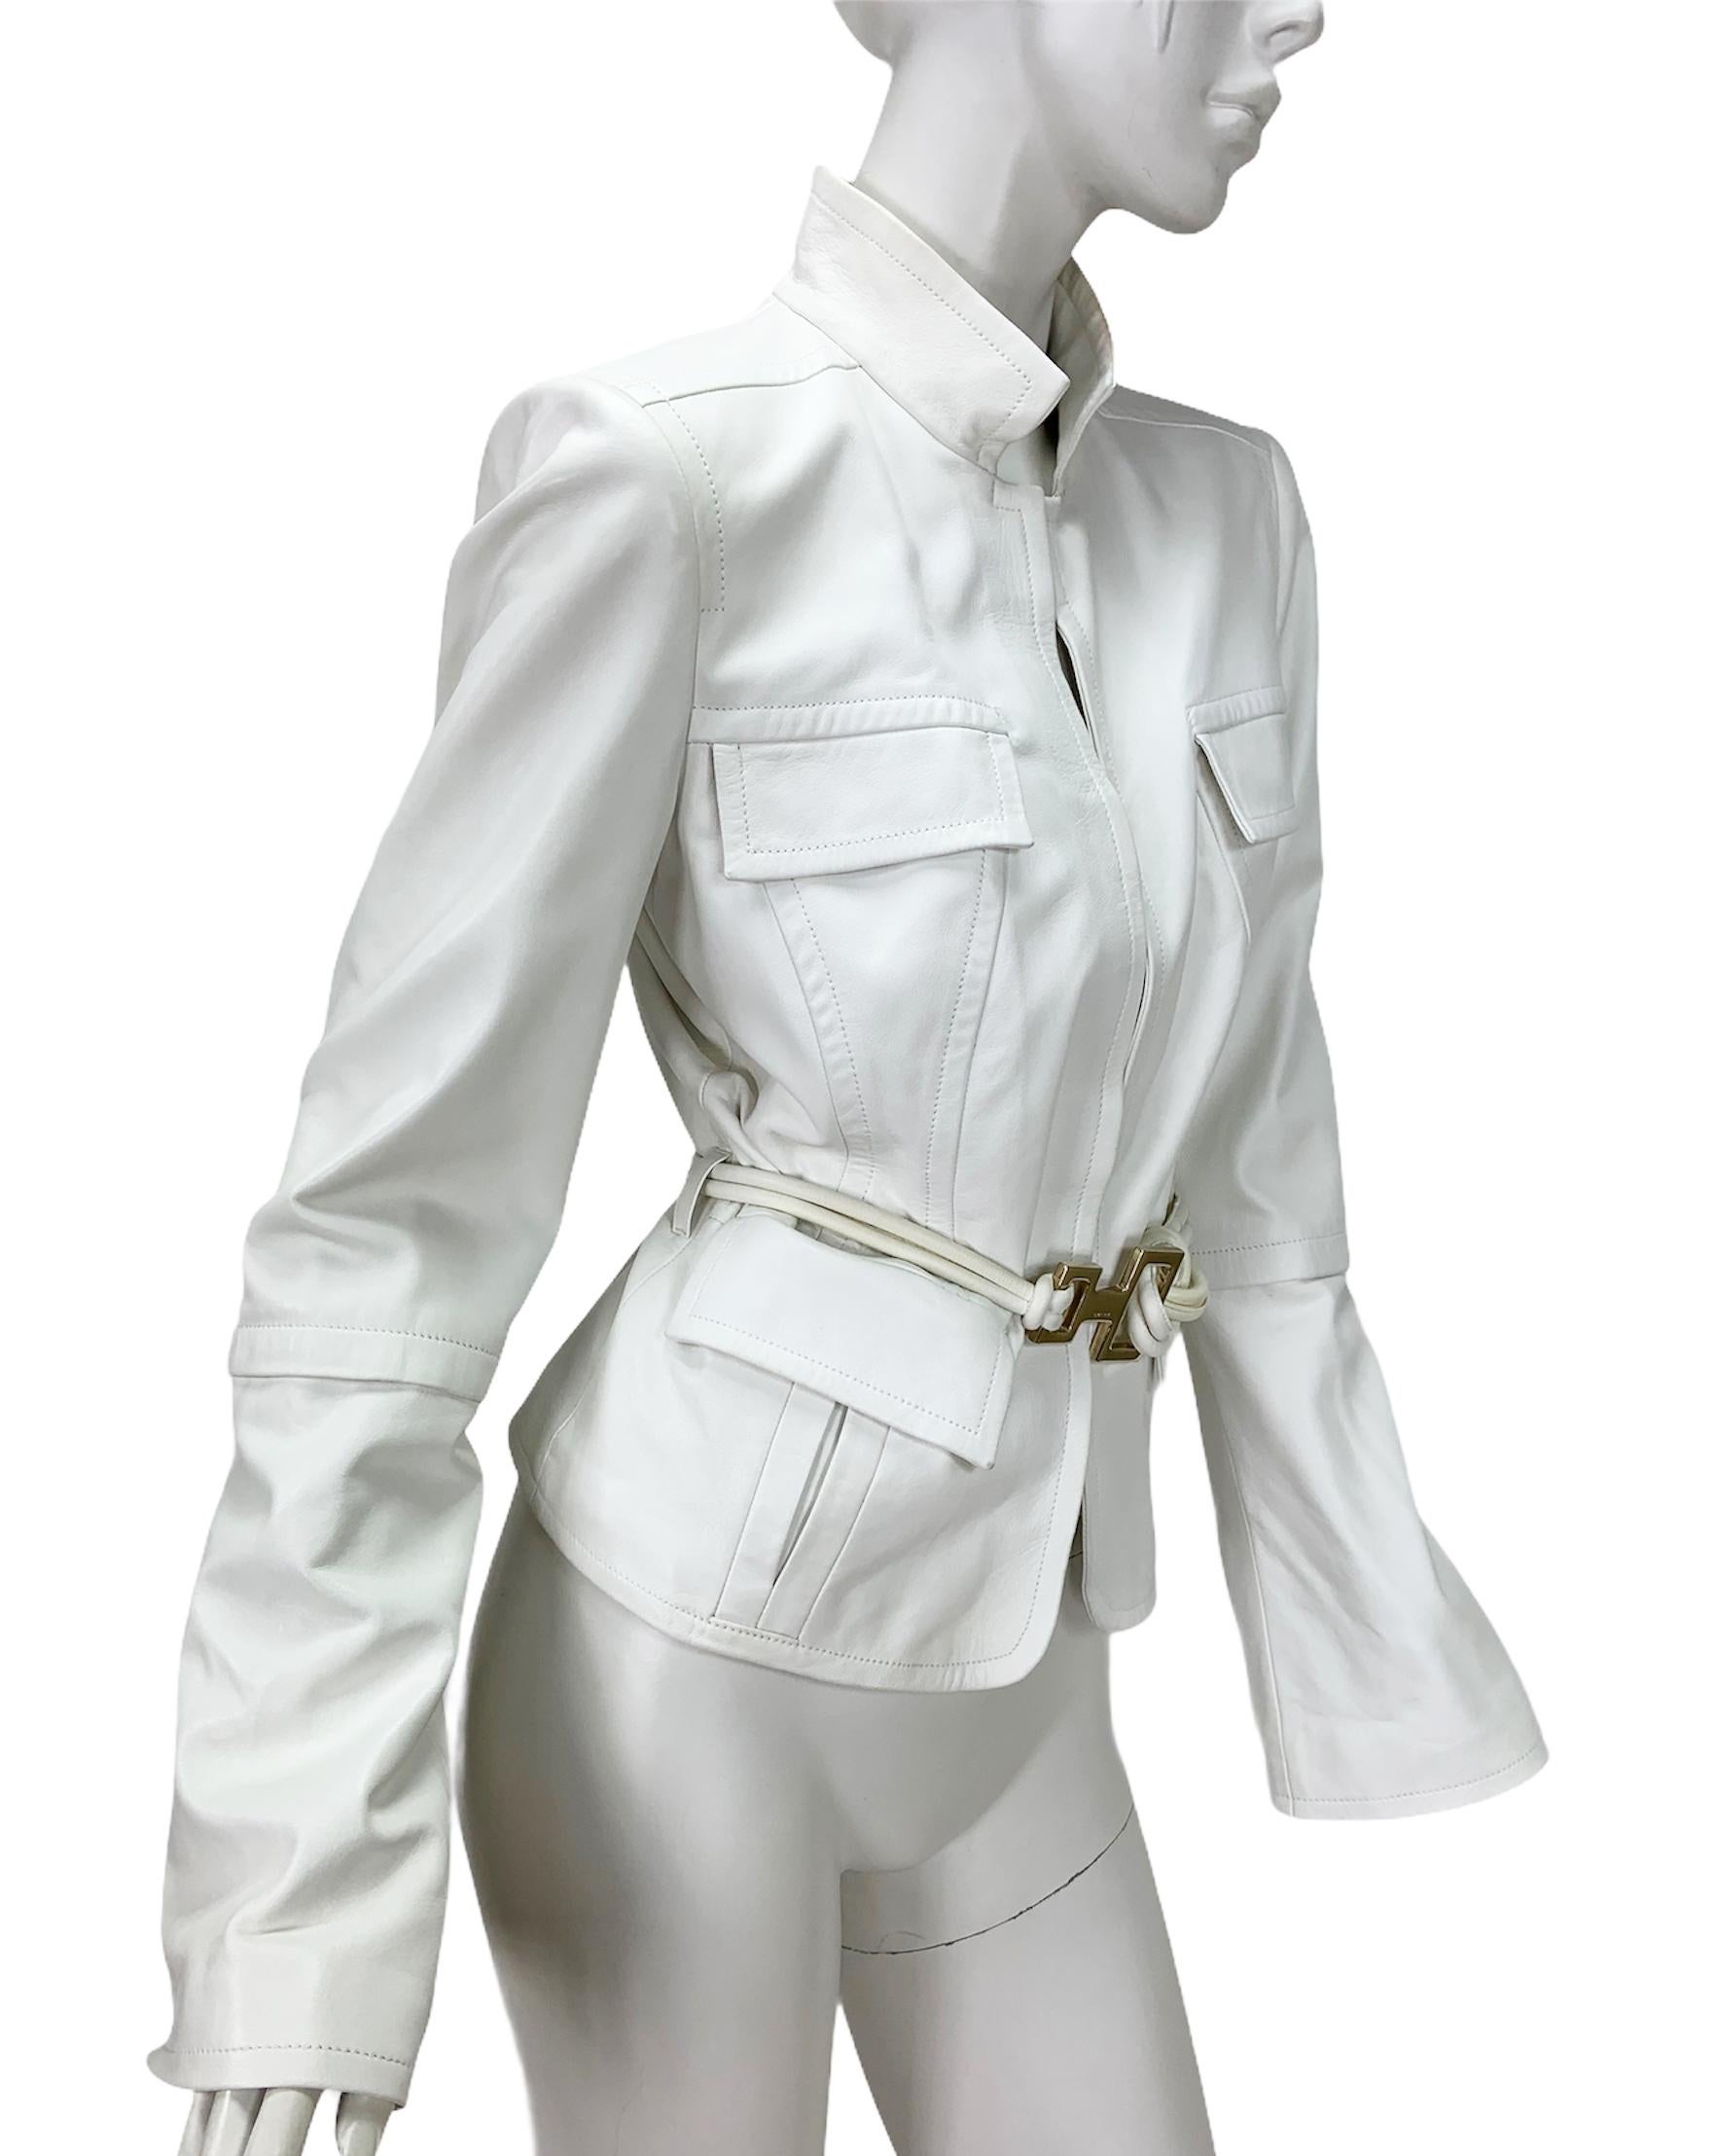 Vintage Tom Ford for Gucci White Leather Belted Fitted Jacket
F/W 2004 Collection
Designer size 46 - US 10 ( please check measurements to avoid unnecessary return )
Genuine Leather, Hook Closure, Two Front Pockets, Two Front Decorative Pocket Flap ,